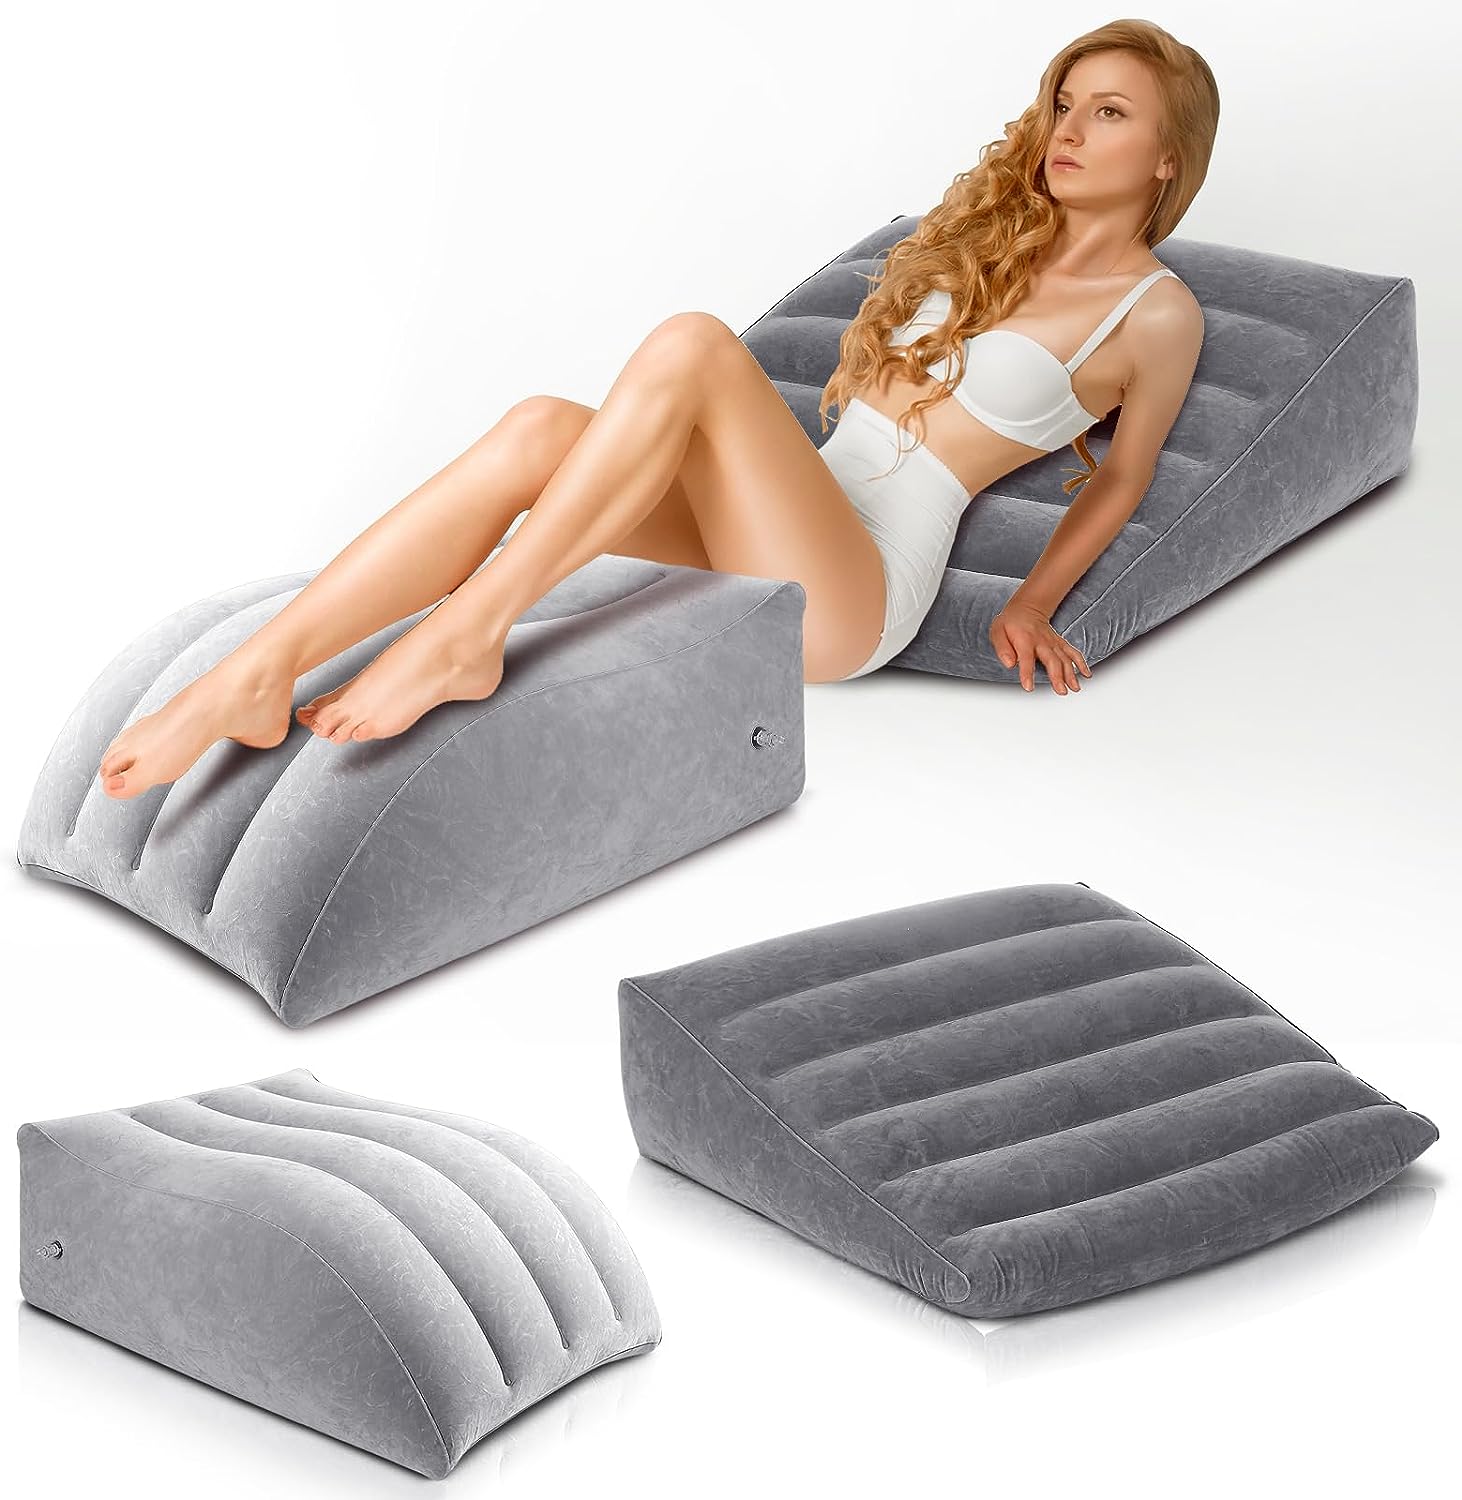 Geetery Inflatable Wedge Pillows Review